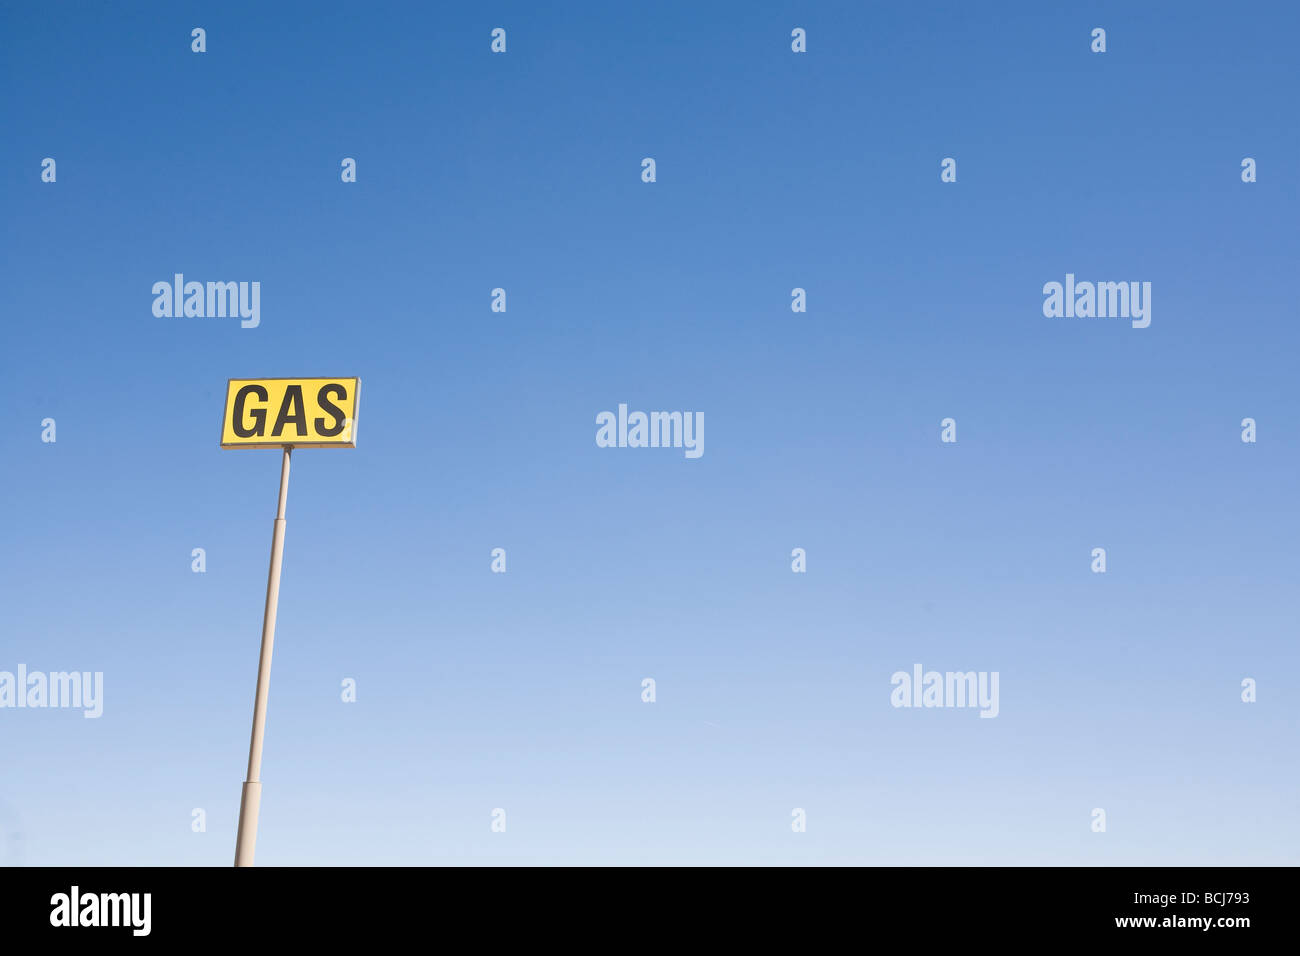 Yellow and black GAS sign on tall pole against blue sky Room for type Stock Photo